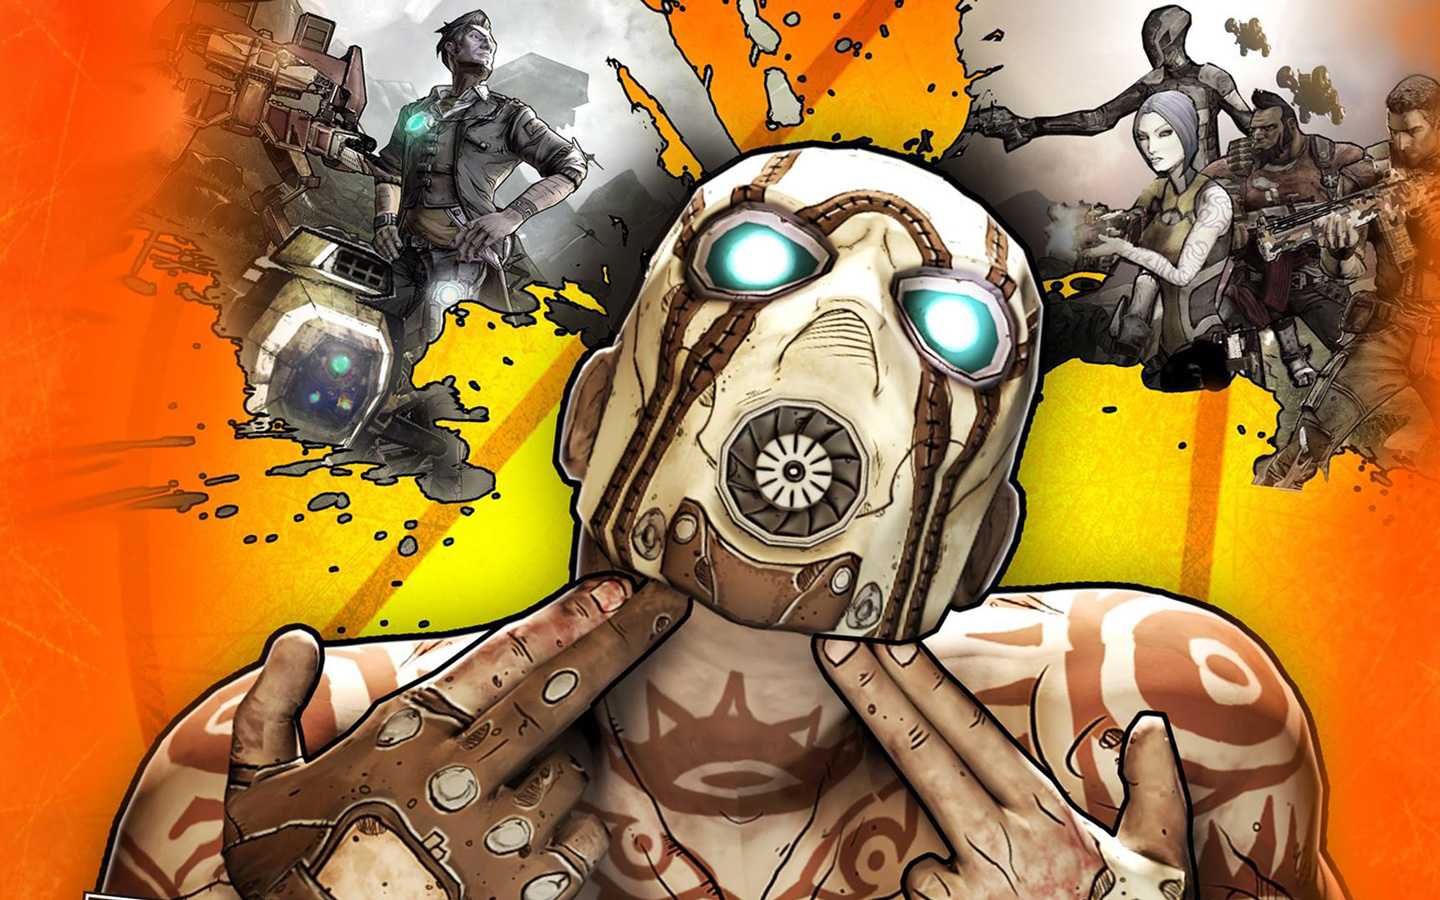 It looks like Borderlands will be the next game series to recieve the remastered edition treatment if the Australian Ratings Board is to be believed.